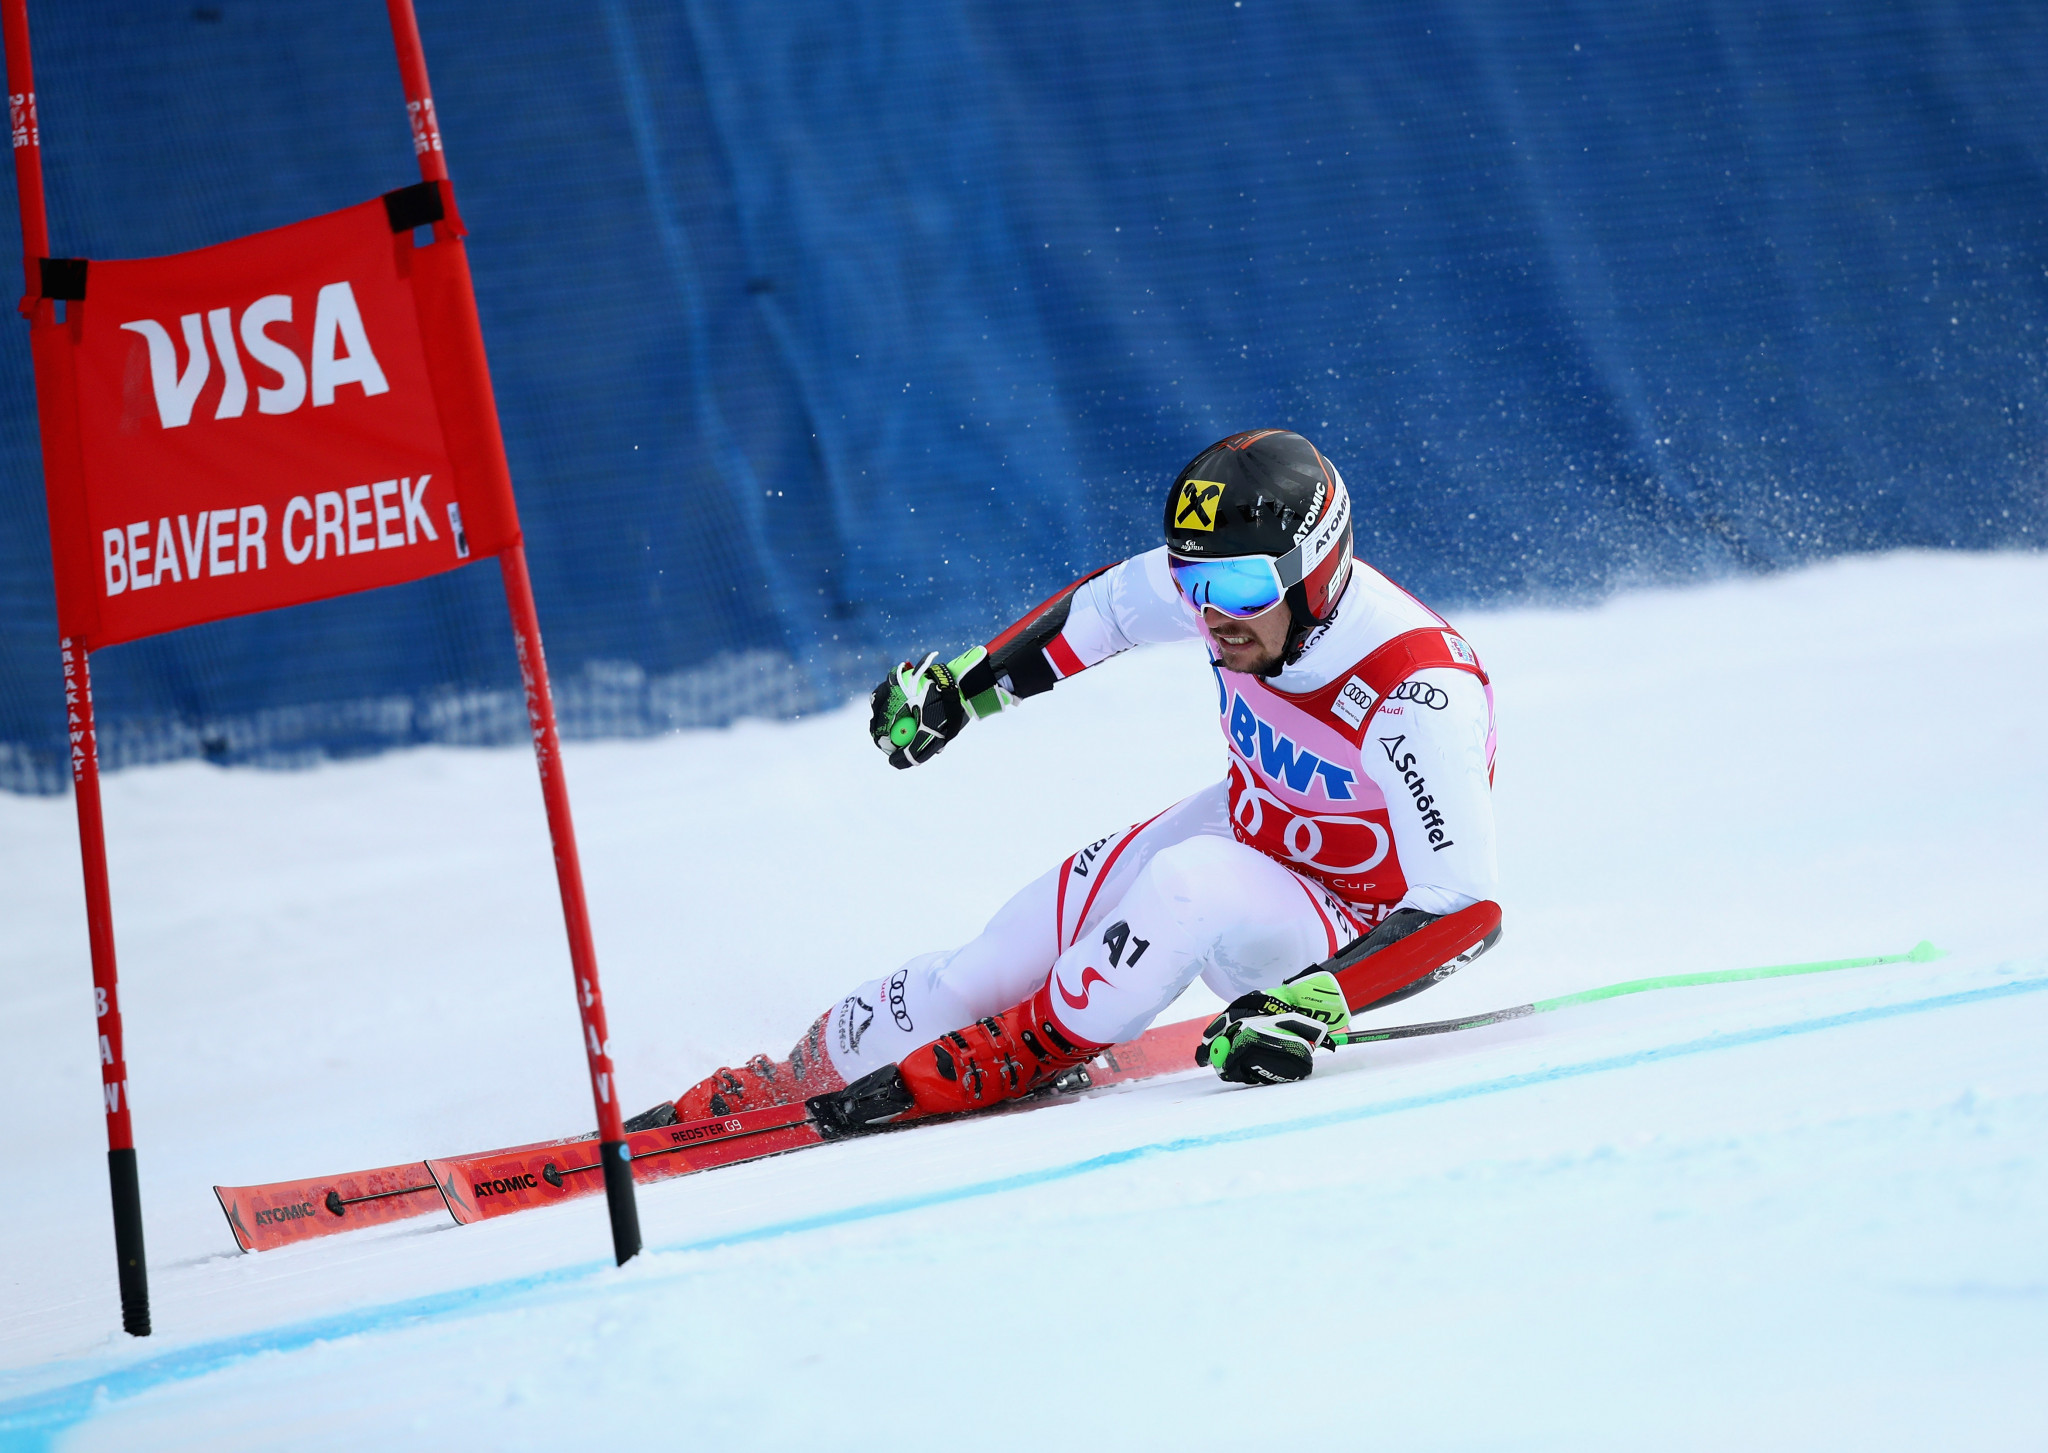 Marcel Hirscher will seek to build on his giant slalom World Cup victory in Beaver Creek ©Getty Images